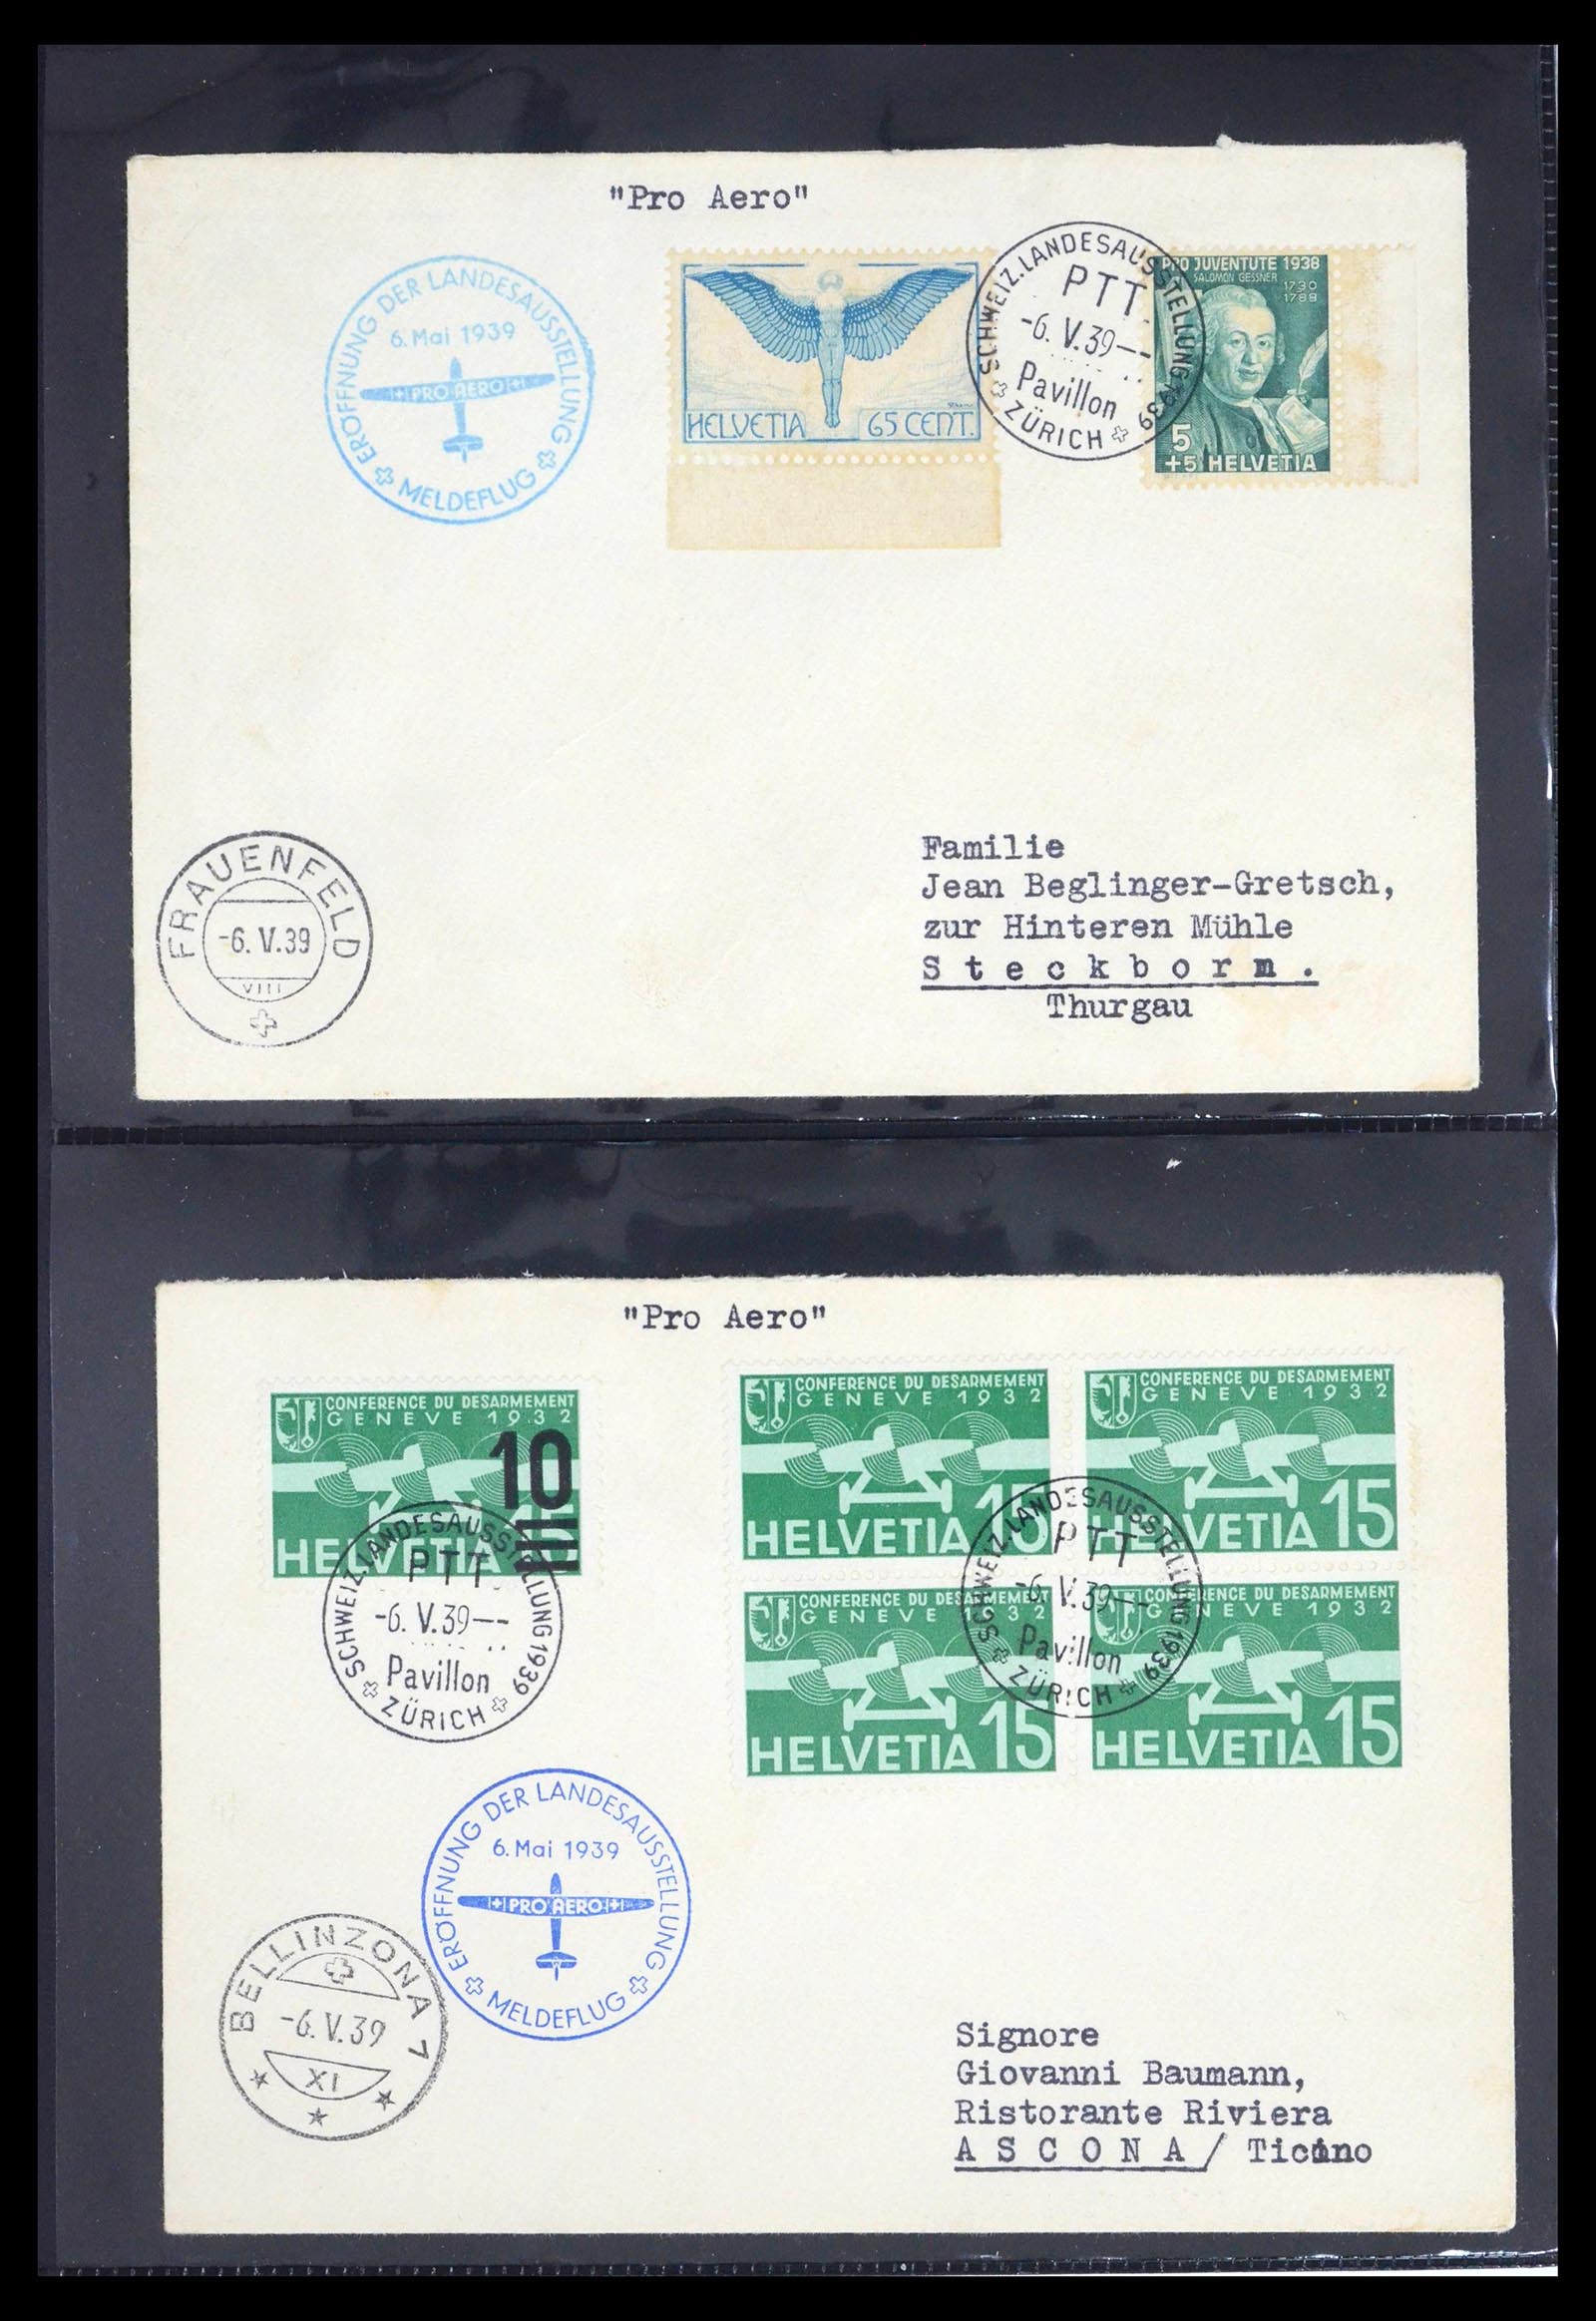 39533 0015 - Stamp collection 39533 Zwitserland airmail covers 1925-1960.